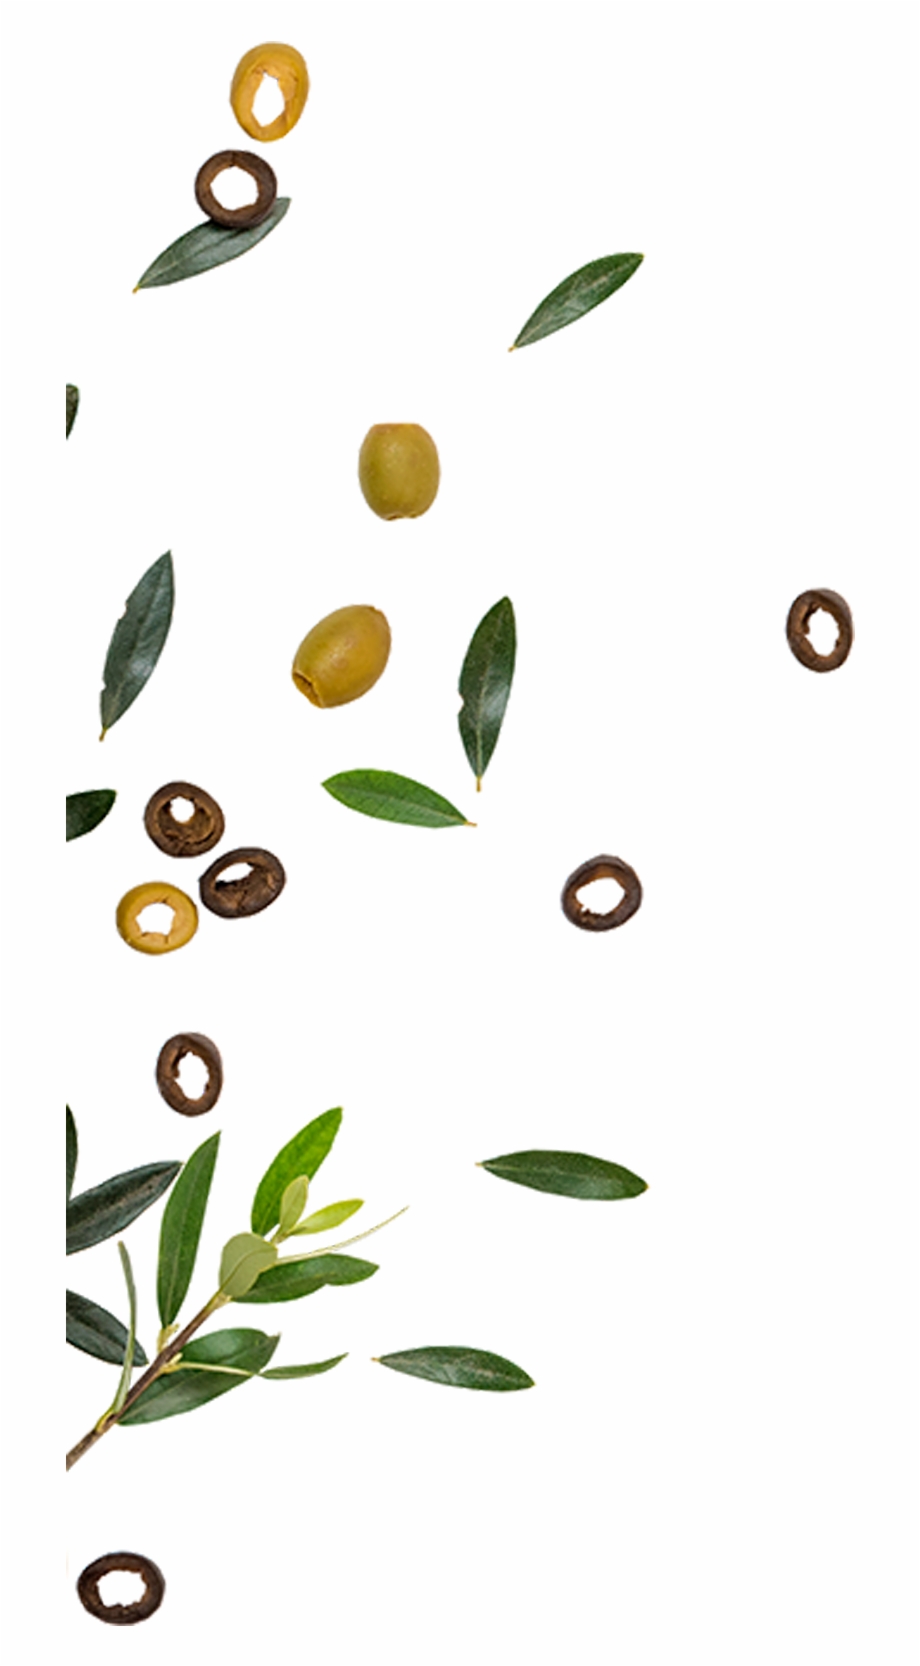 Golden Olive Is One Of The Leading Companies